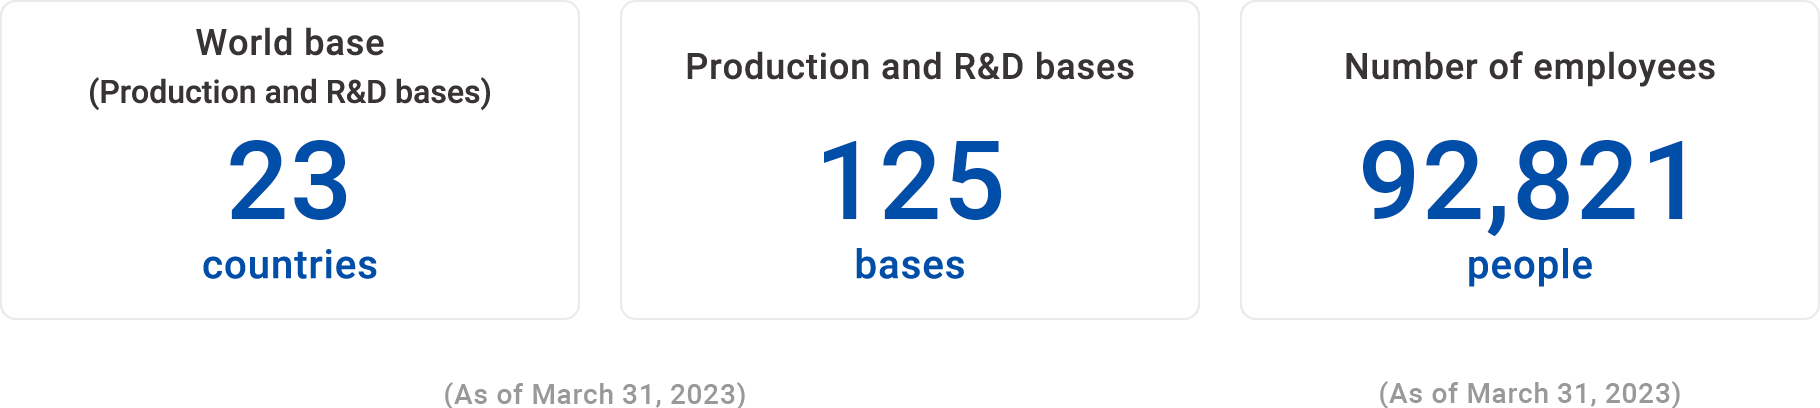 World base(Production and R&D bases) 22 countries, Production and R&D bases 96 bases, Number of employees 87,401 people